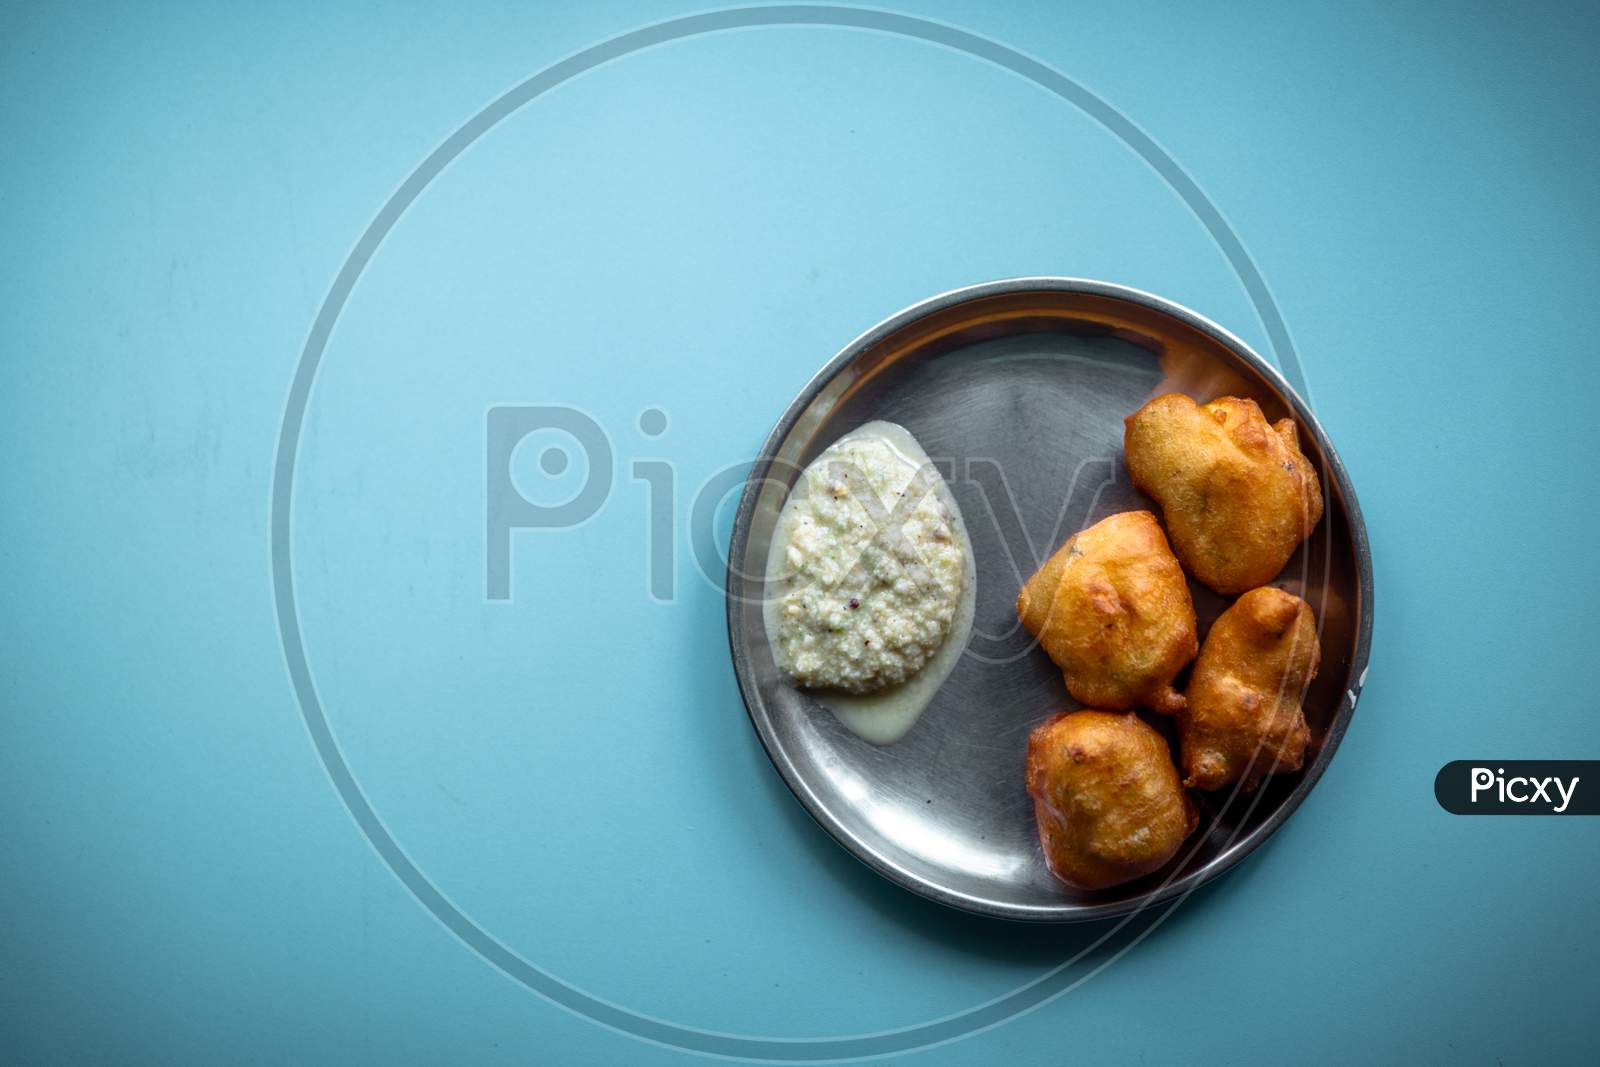 Indian Delicious Mysore Bonda With Chutney For A Healthy Evening Snack